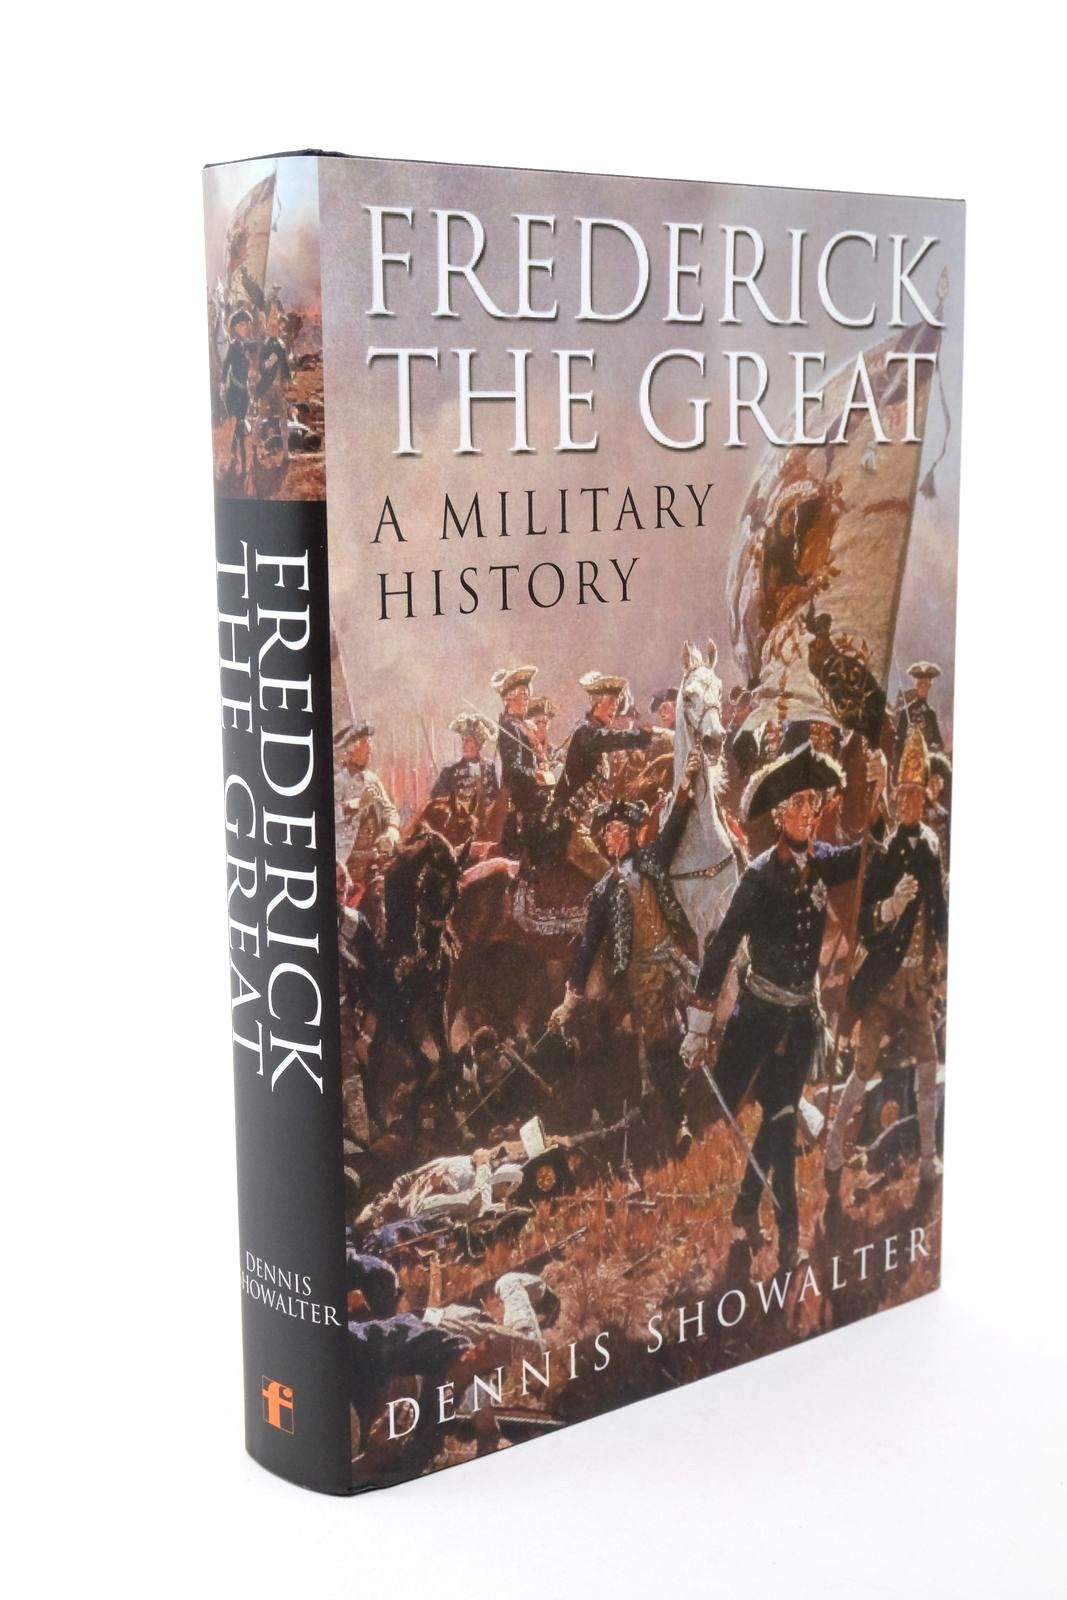 Photo of FREDERICK THE GREAT - A MILITARY HISTORY written by Showalter, Dennis published by Frontline Books (STOCK CODE: 1322609)  for sale by Stella & Rose's Books